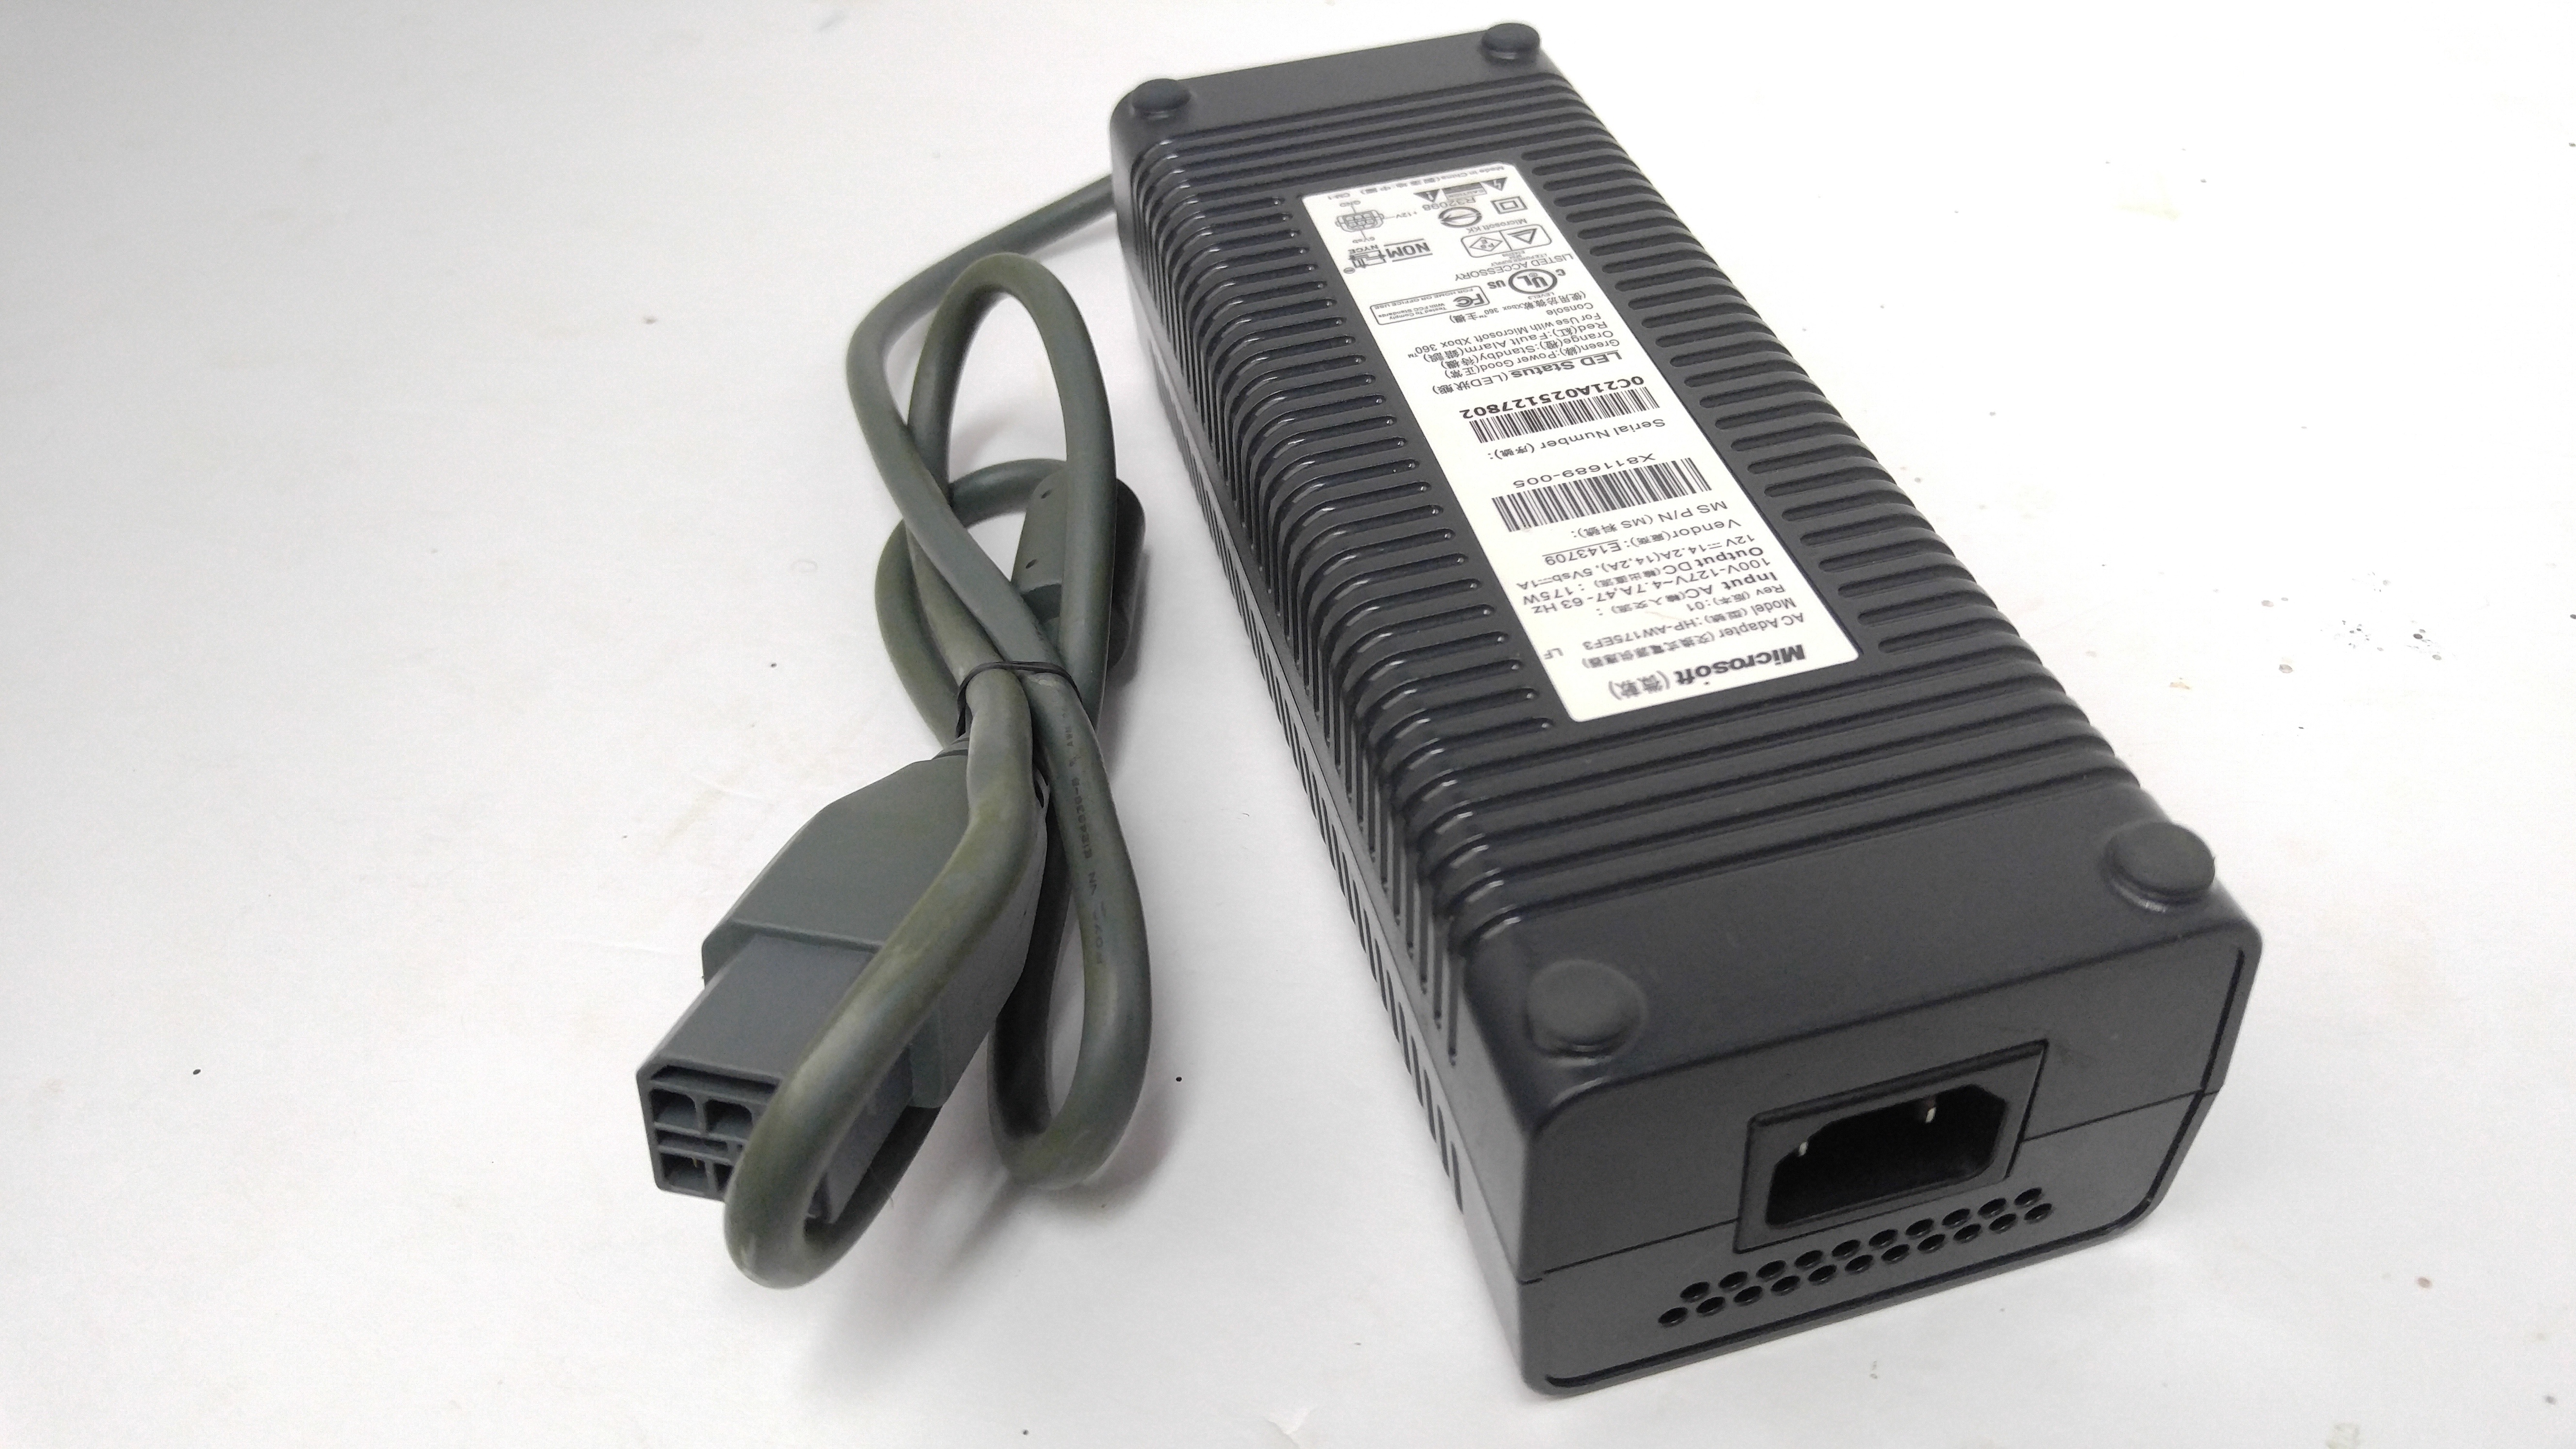 Microsoft Xbox 360 175W AC Adapter - HP-AW175EF3 - Click Image to Close